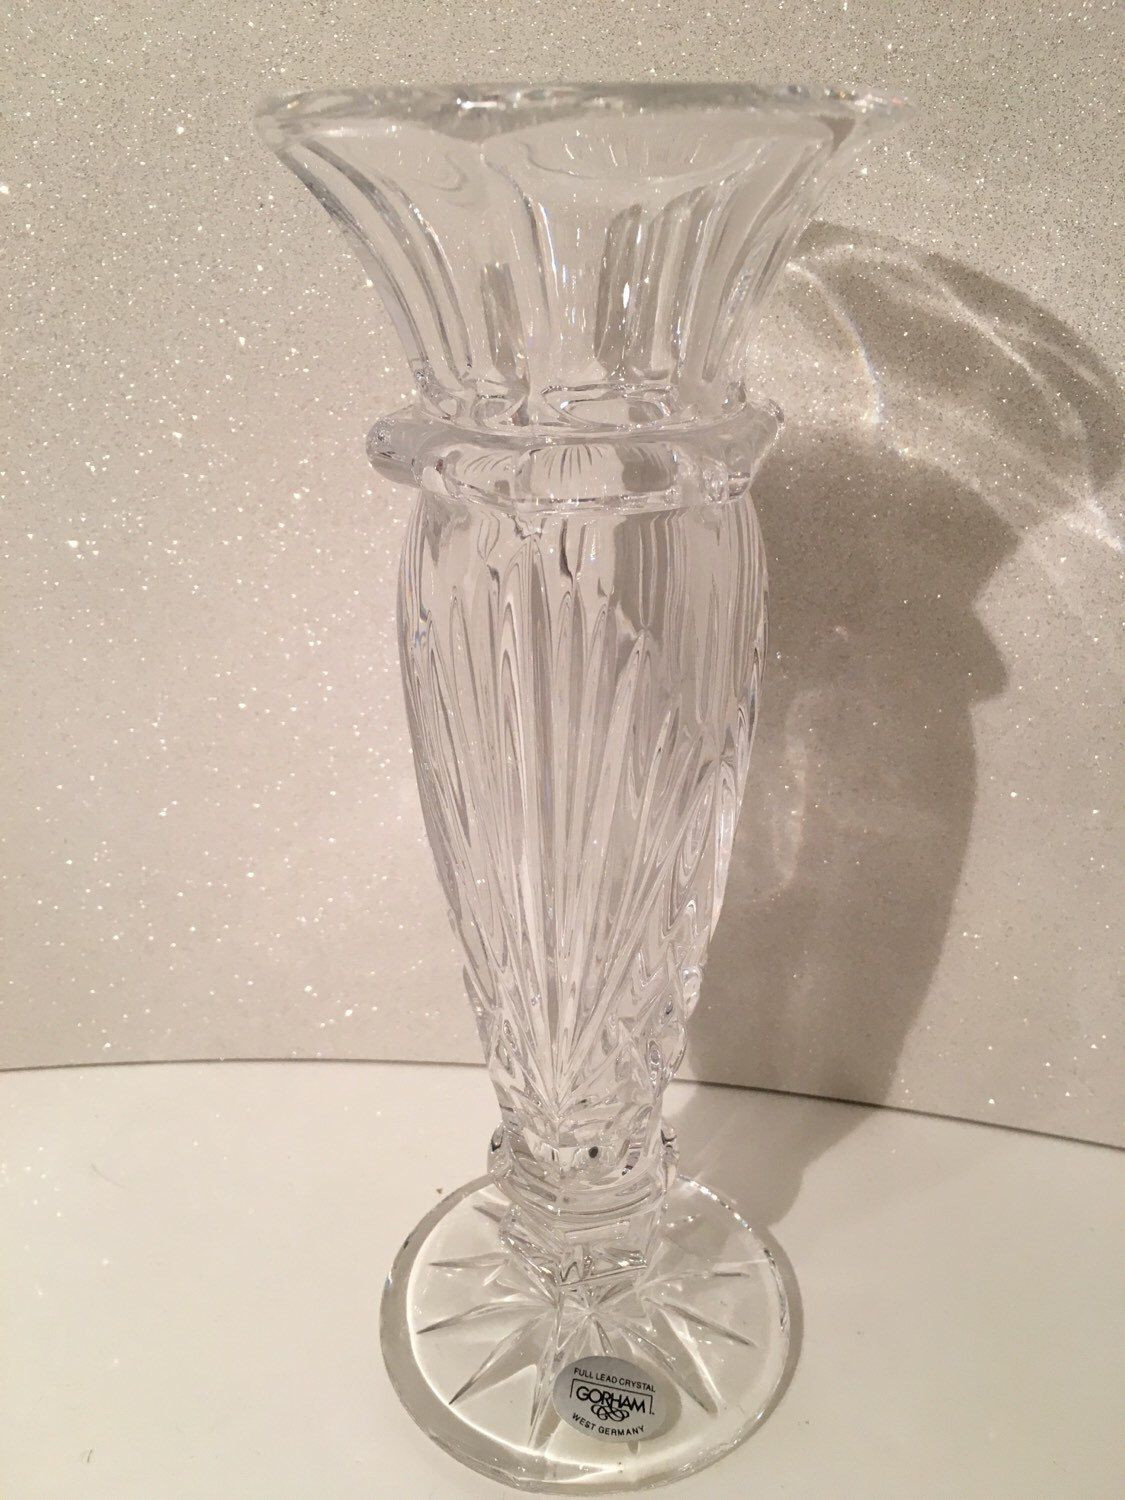 gorham crystal vase of a personal favorite from my etsy shop https www etsy com listing regarding a personal favorite from my etsy shop https www etsy com listing 260337454 vintage gorham crystal bud vase flower